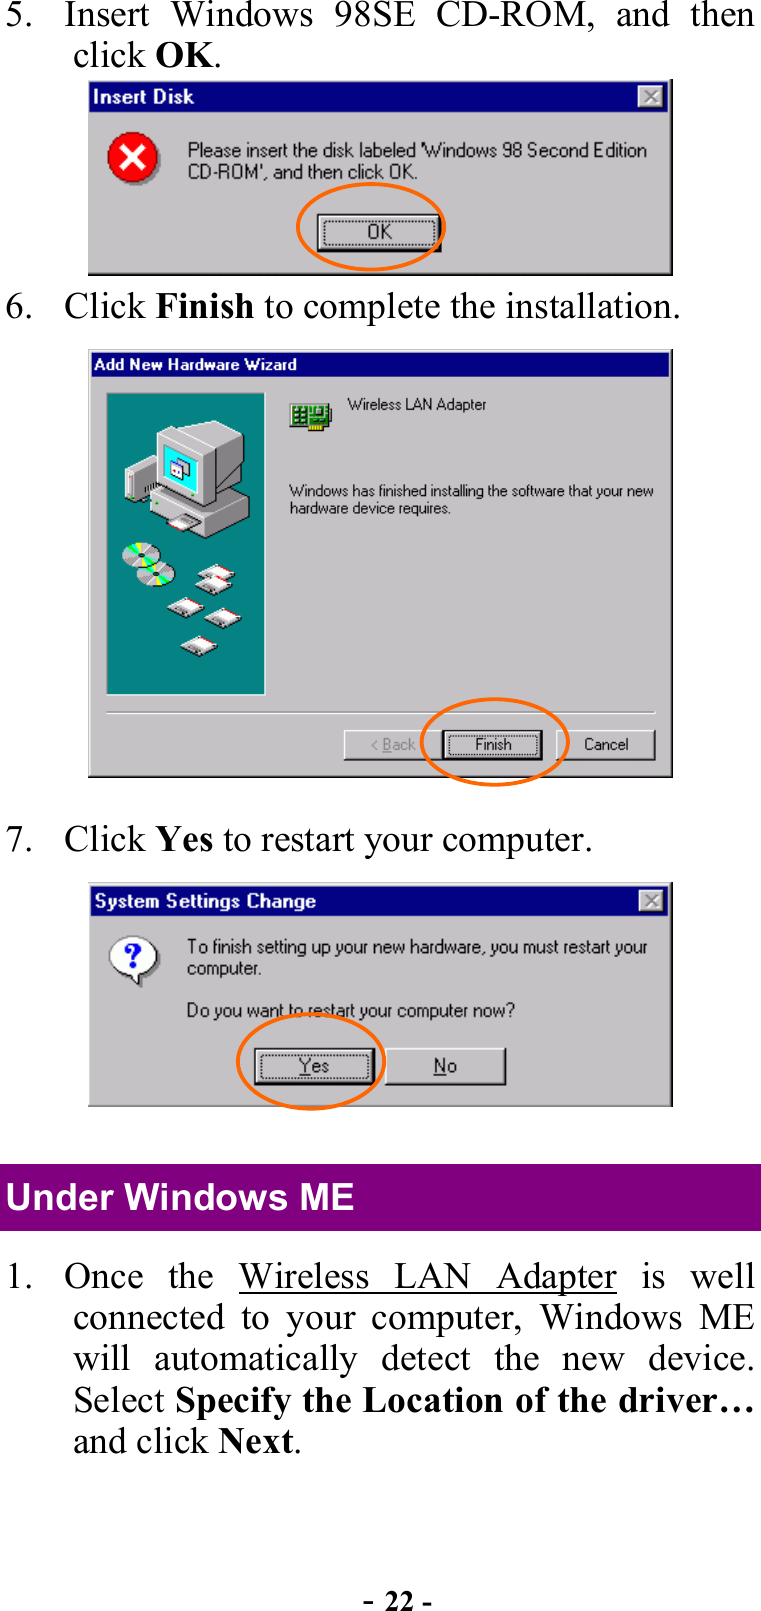  - 22 - 5.  Insert Windows 98SE CD-ROM, and then click OK.  6. Click Finish to complete the installation.    7. Click Yes to restart your computer.    Under Windows ME 1.  Once the Wireless LAN Adapter is well connected to your computer, Windows ME will automatically detect the new device.  Select Specify the Location of the driver… and click Next. 